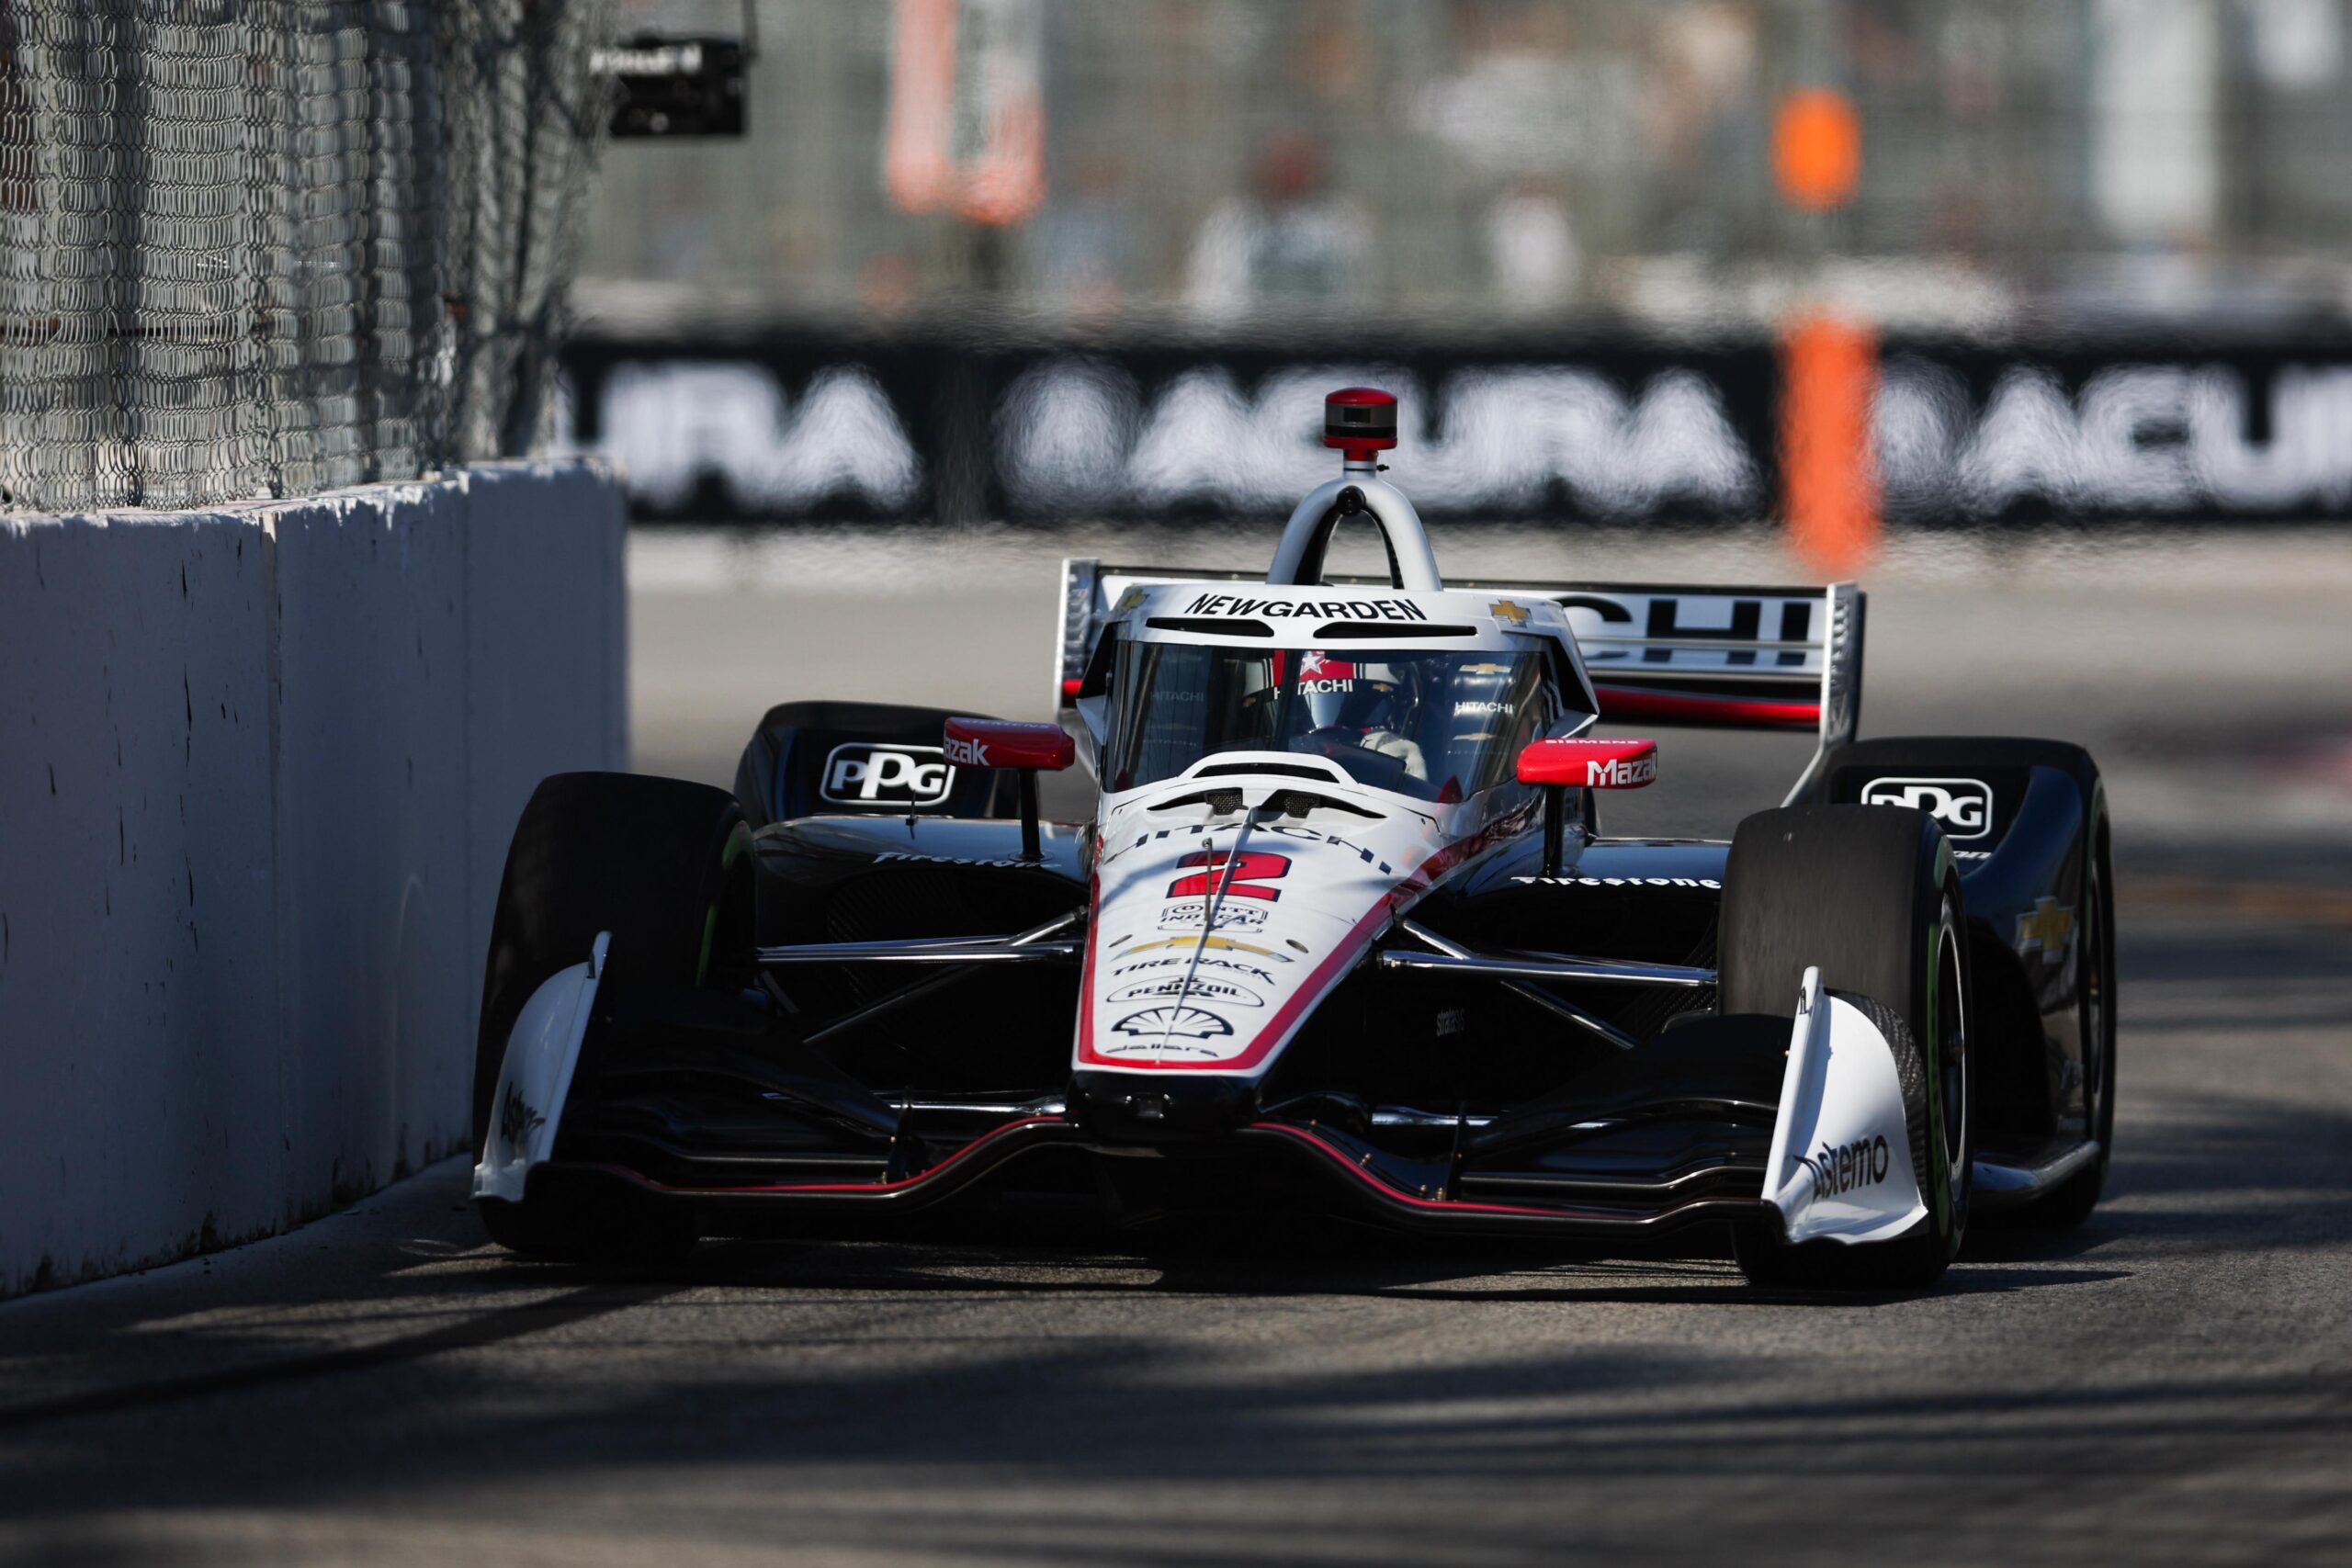 Why Josef Newgarden got Disqualified from GP of St. Pete